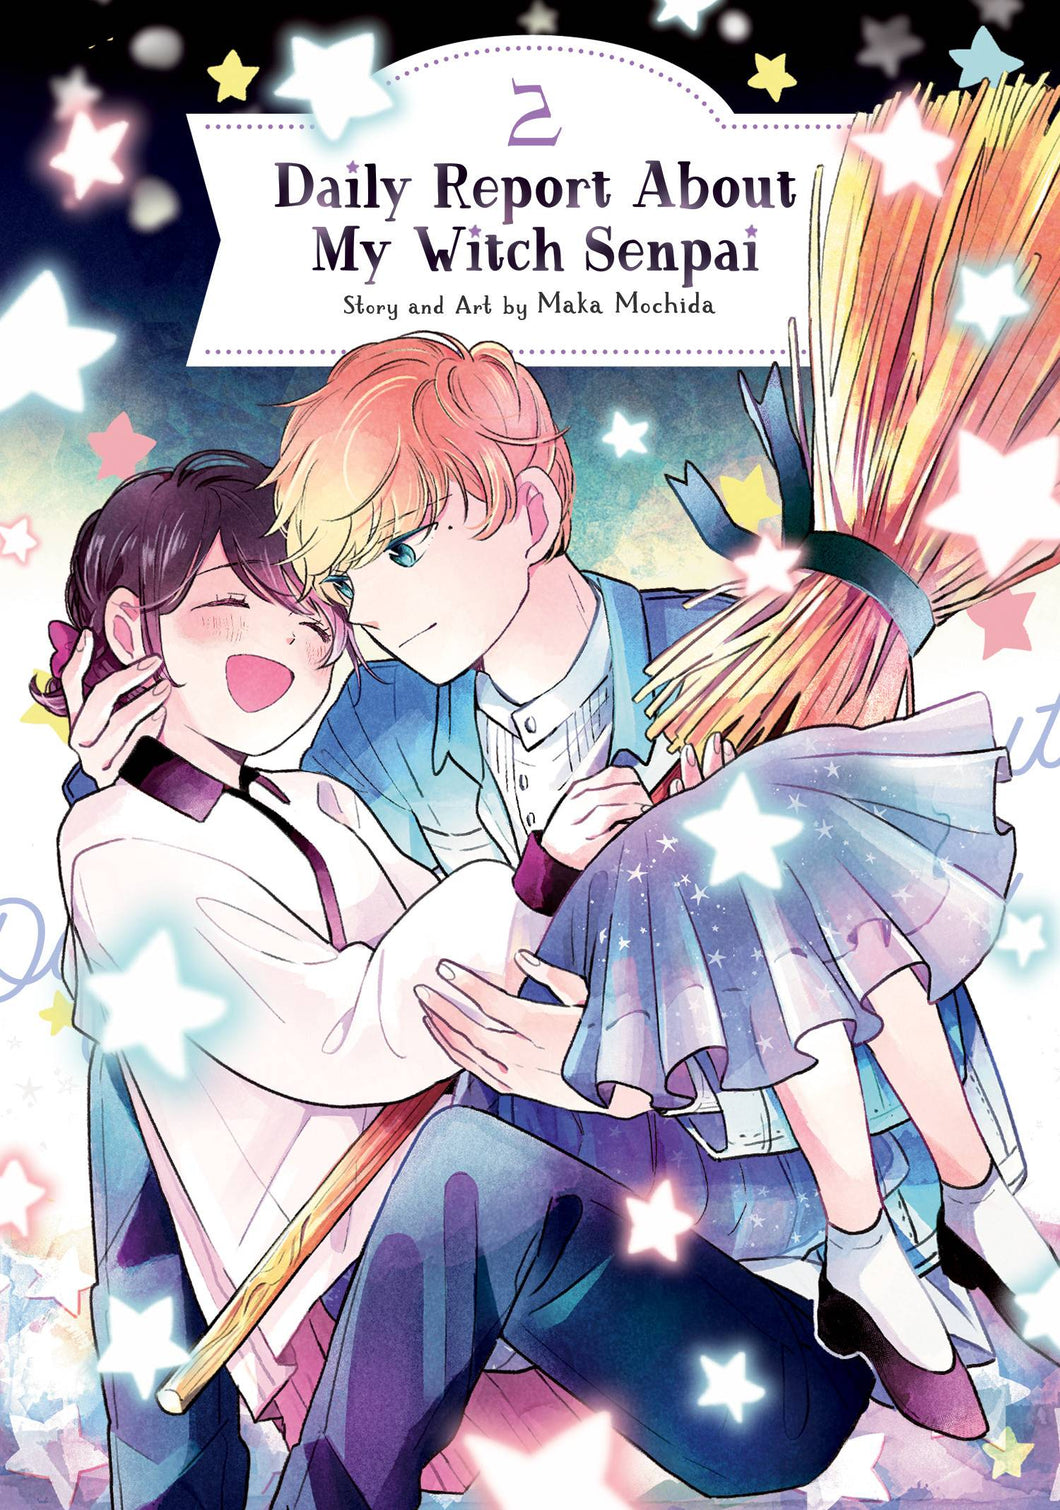 Daily Report About My Witch Senpai GN Vol 02   (of 2) - Books